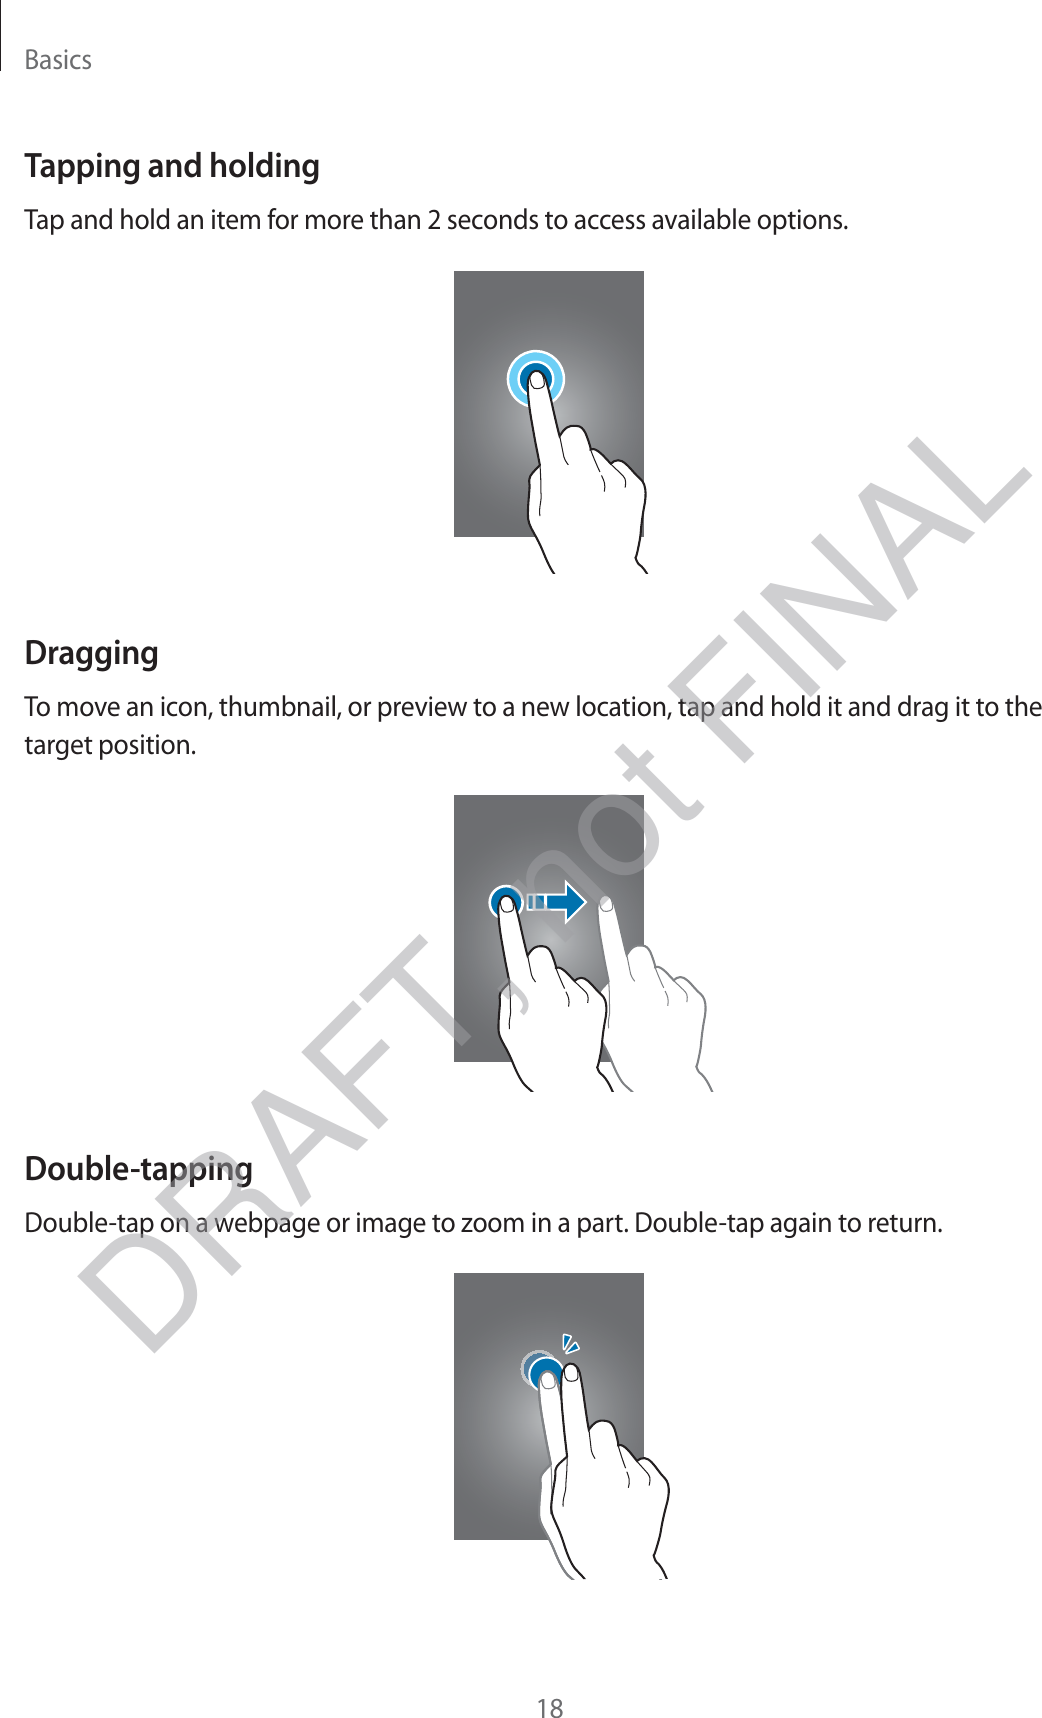 Basics18Tapping and holdingTap and hold an item for more than 2 seconds to access available options.DraggingTo move an icon, thumbnail, or preview to a new location, tap and hold it and drag it to the target position.Double-tappingDouble-tap on a webpage or image to zoom in a part. Double-tap again to return.DRAFT, not FINAL